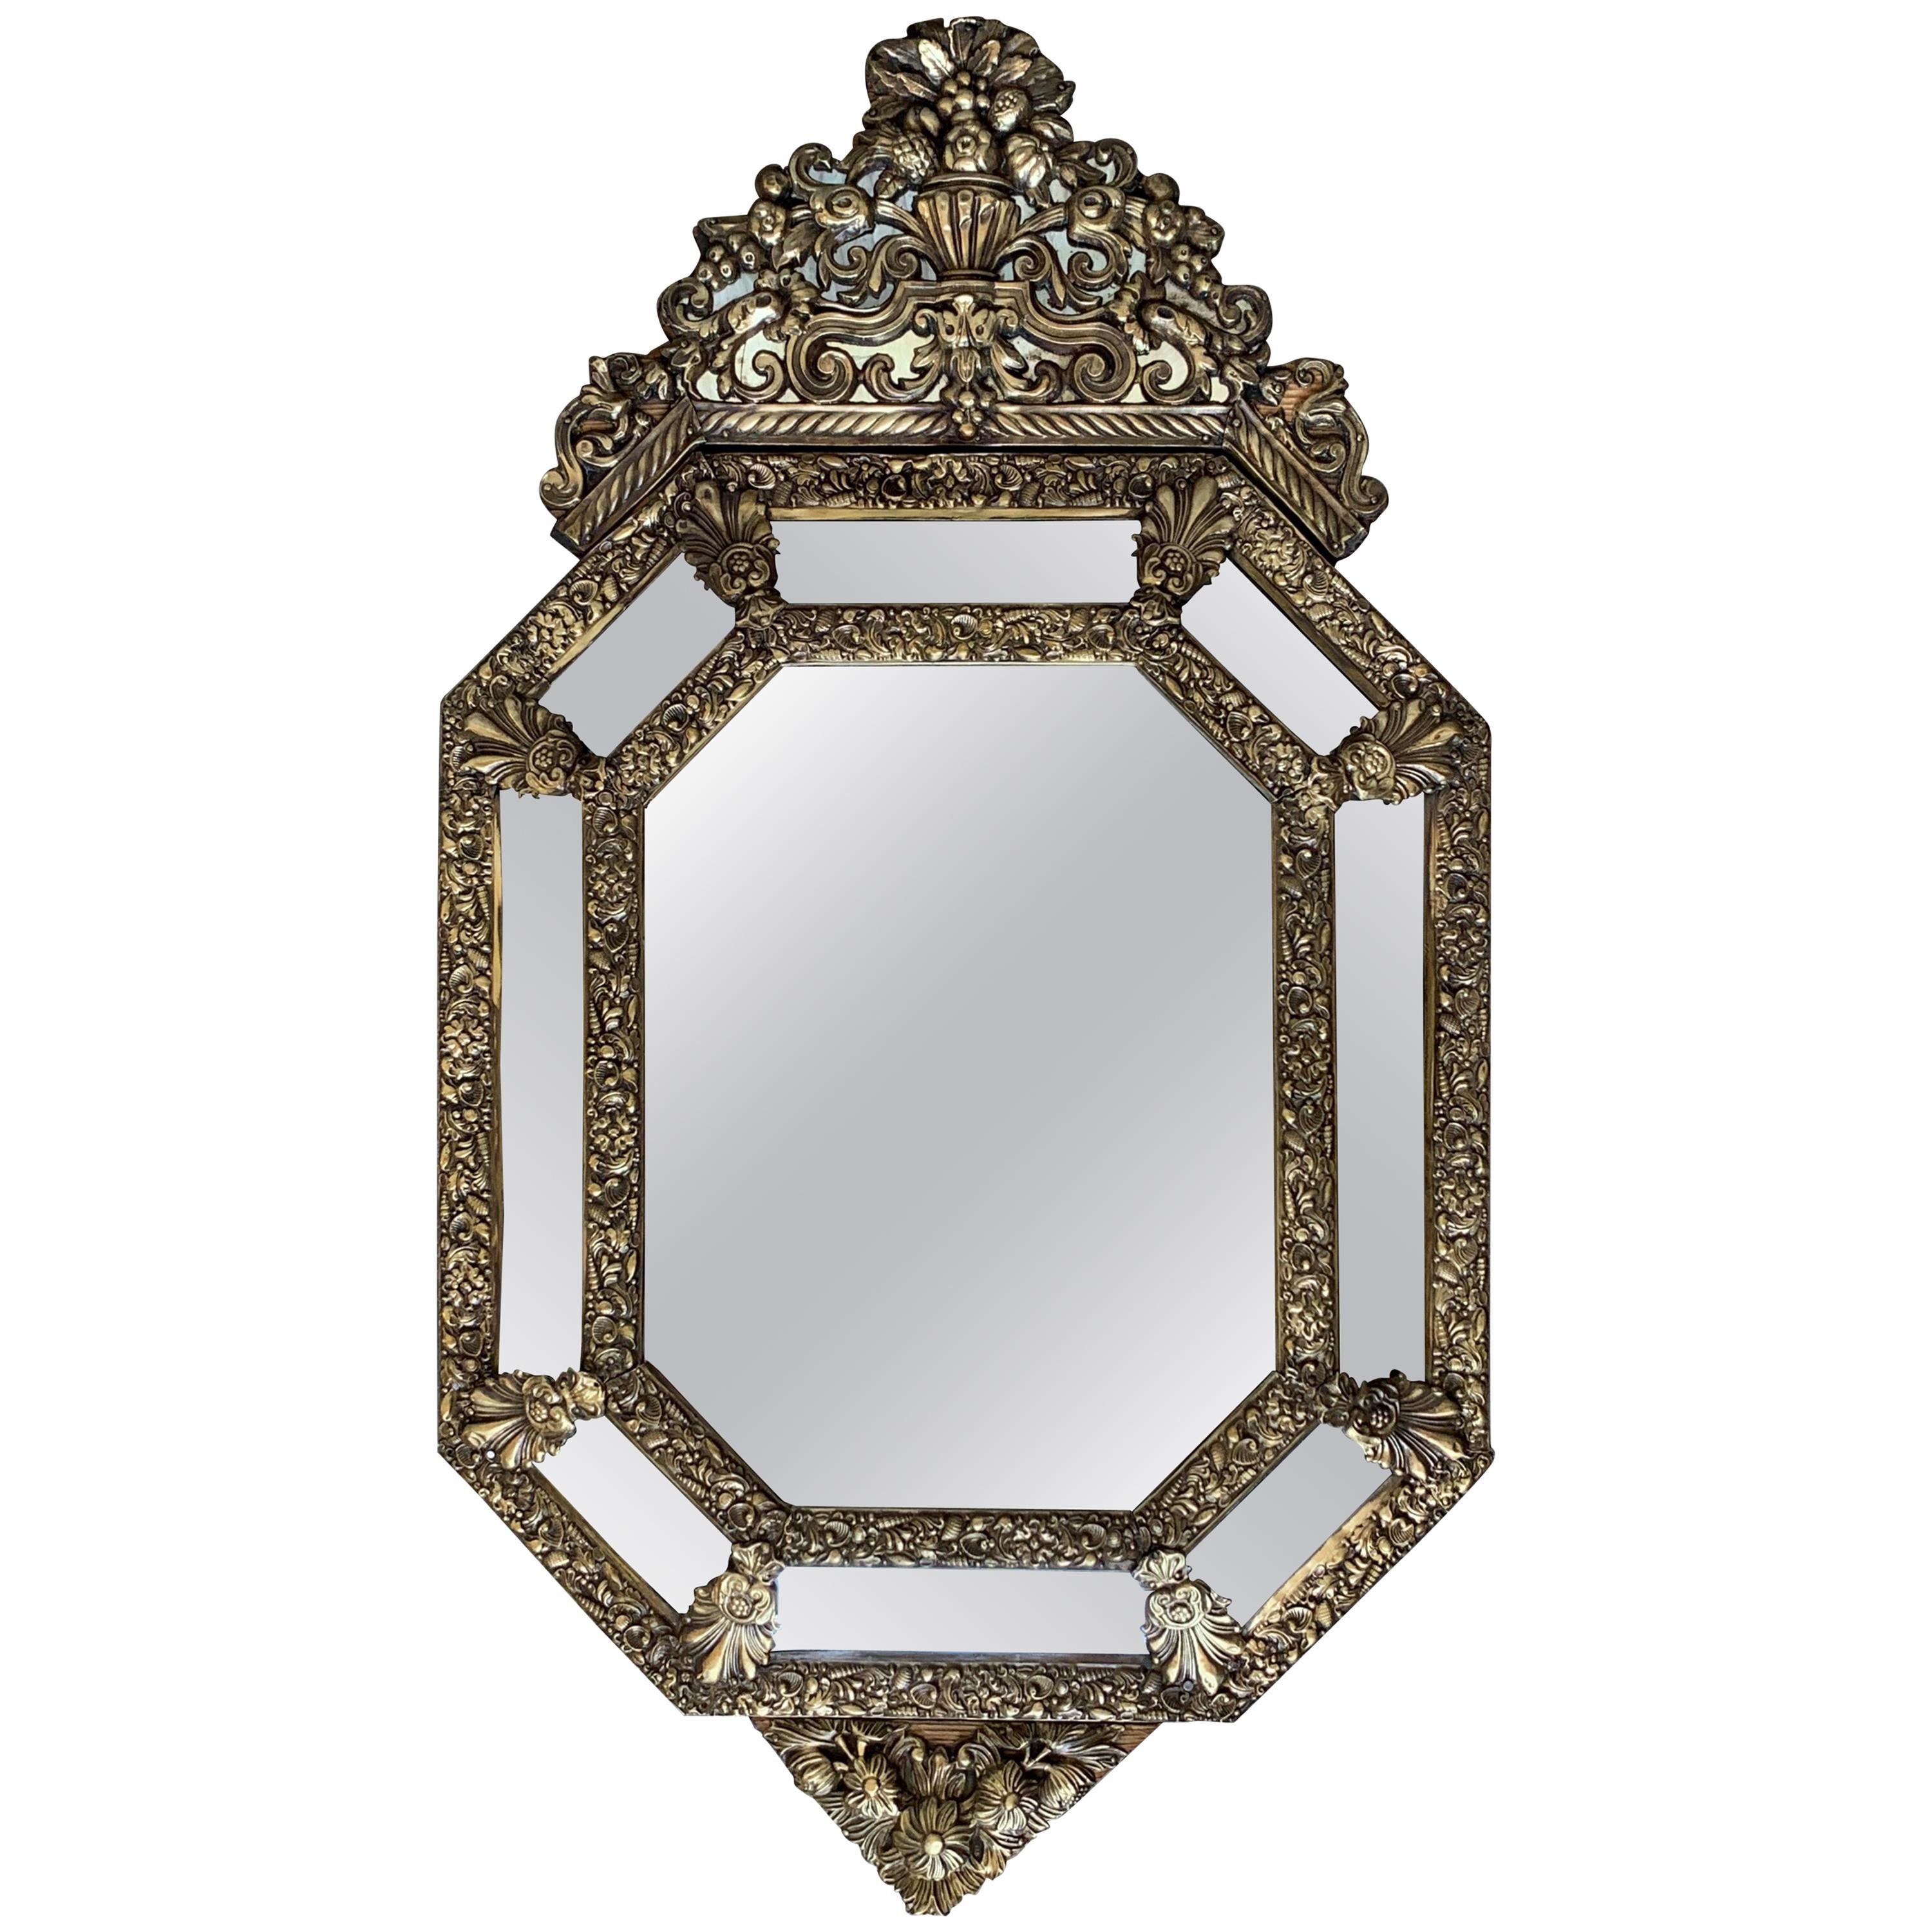 19th Century French Repousse Hexagonal Brass Relief Wall Mirror with Crest